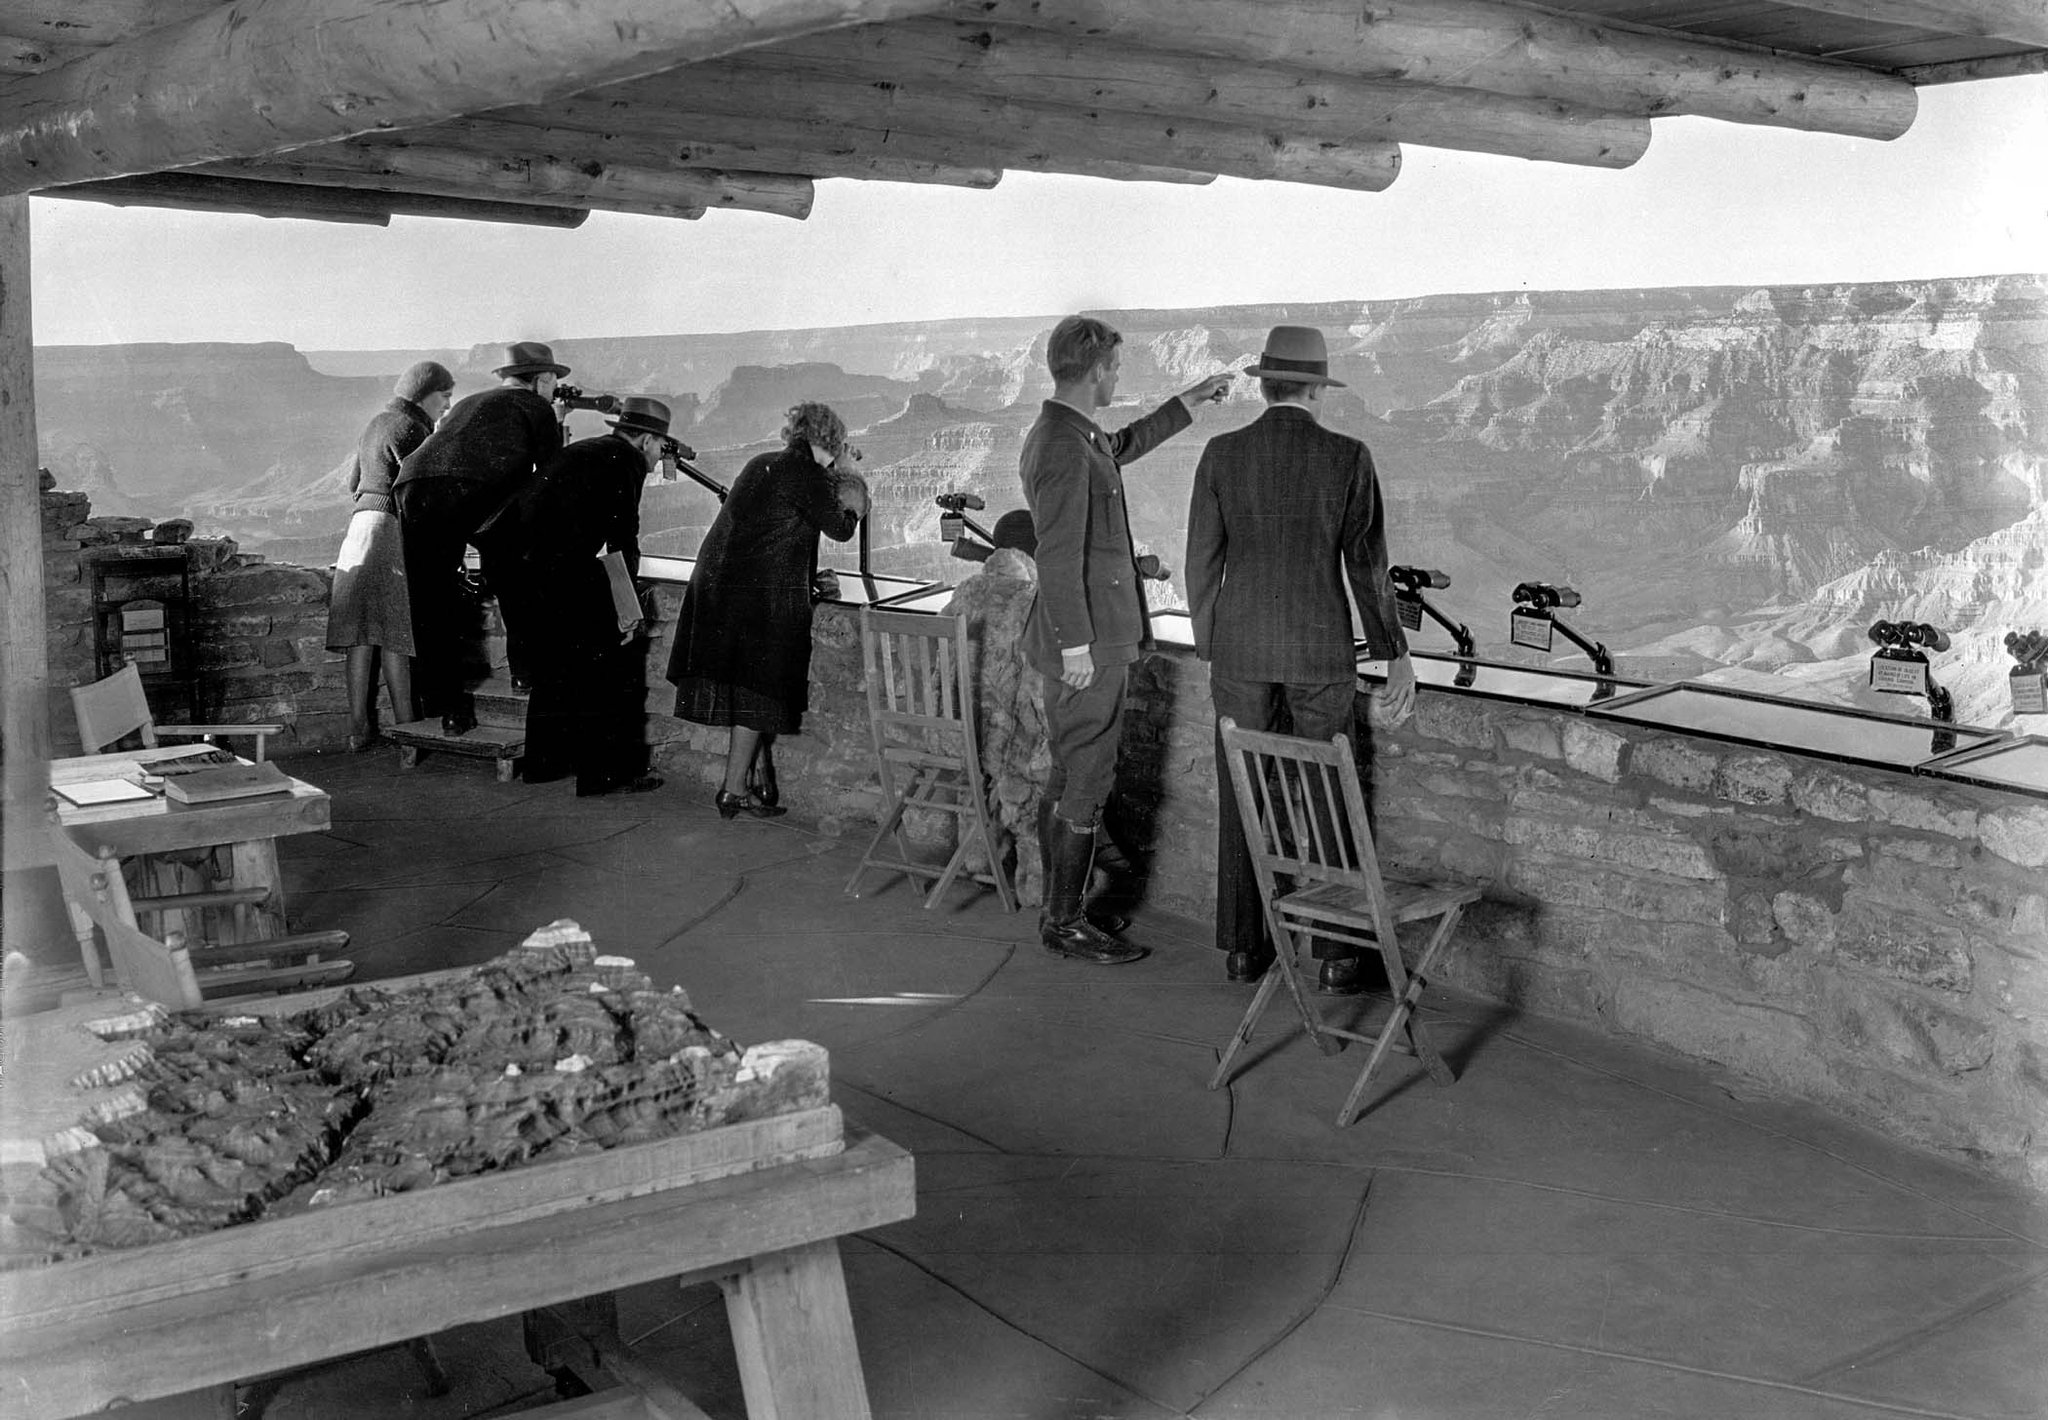 grand-canyon-nps-on-twitter-on-this-day-in-1928-yavapai-point